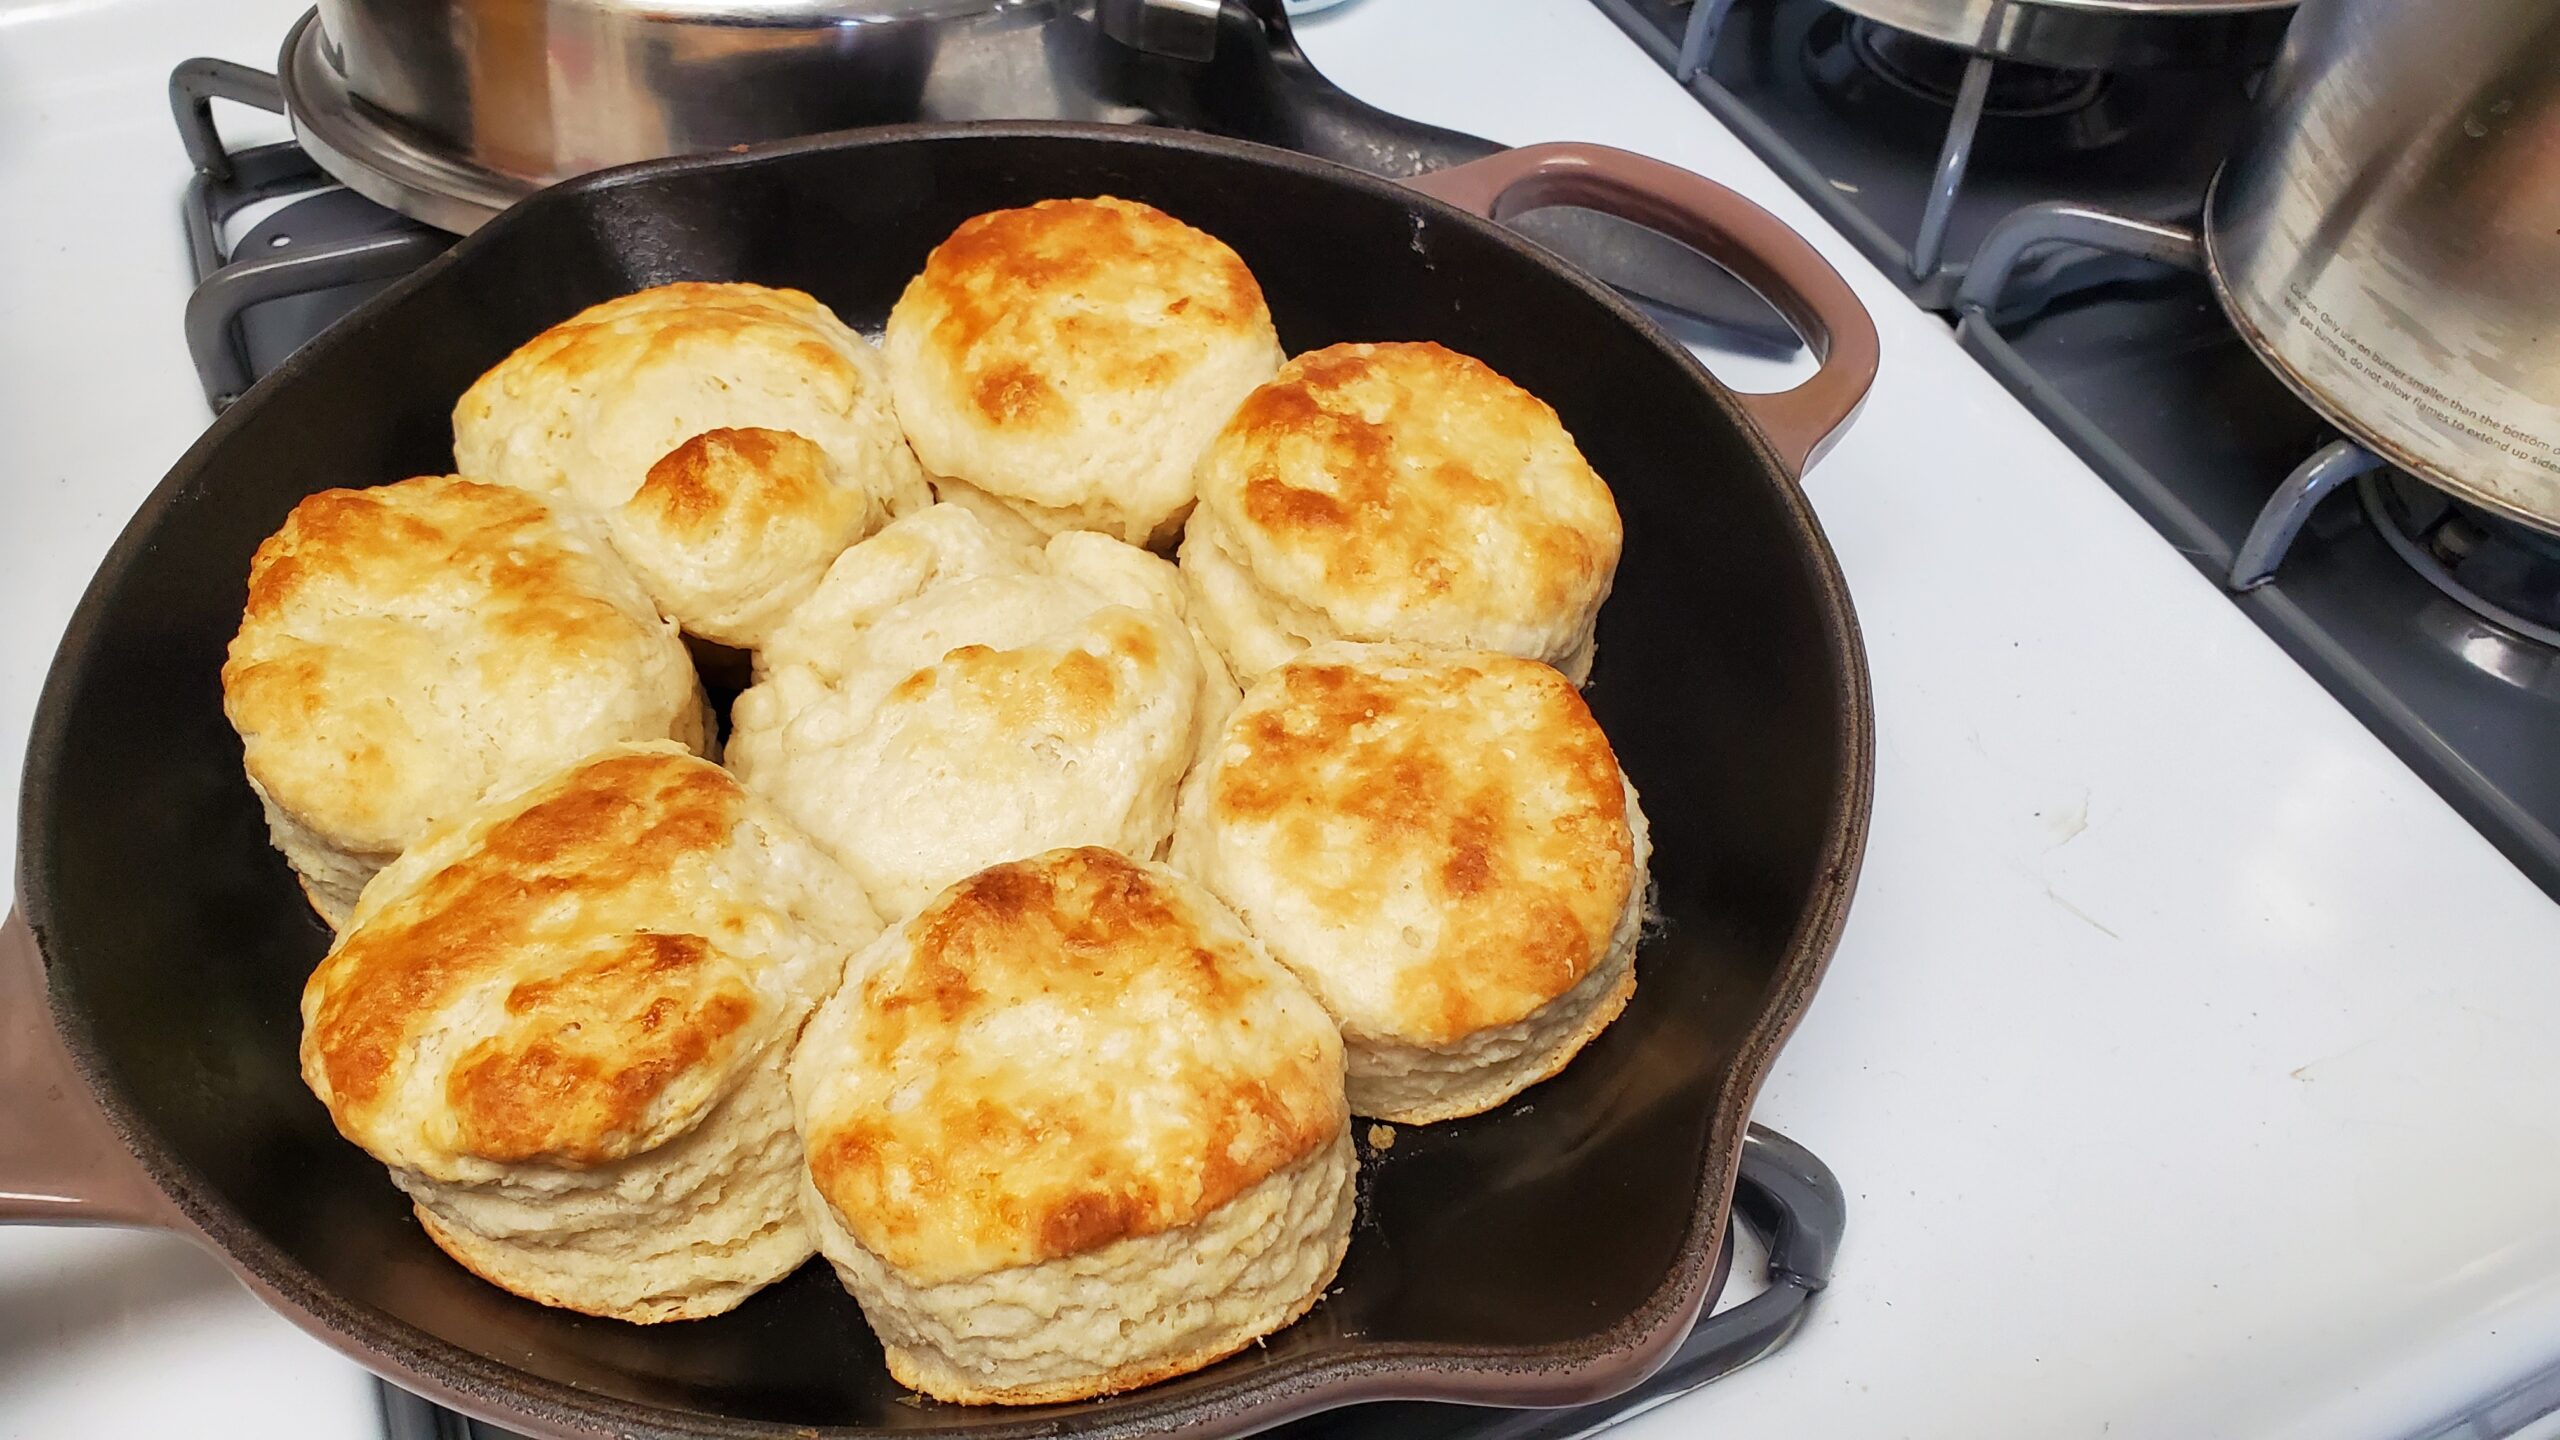 Photo of freshly baked buttermilk biscuits in a cast iron skillet.